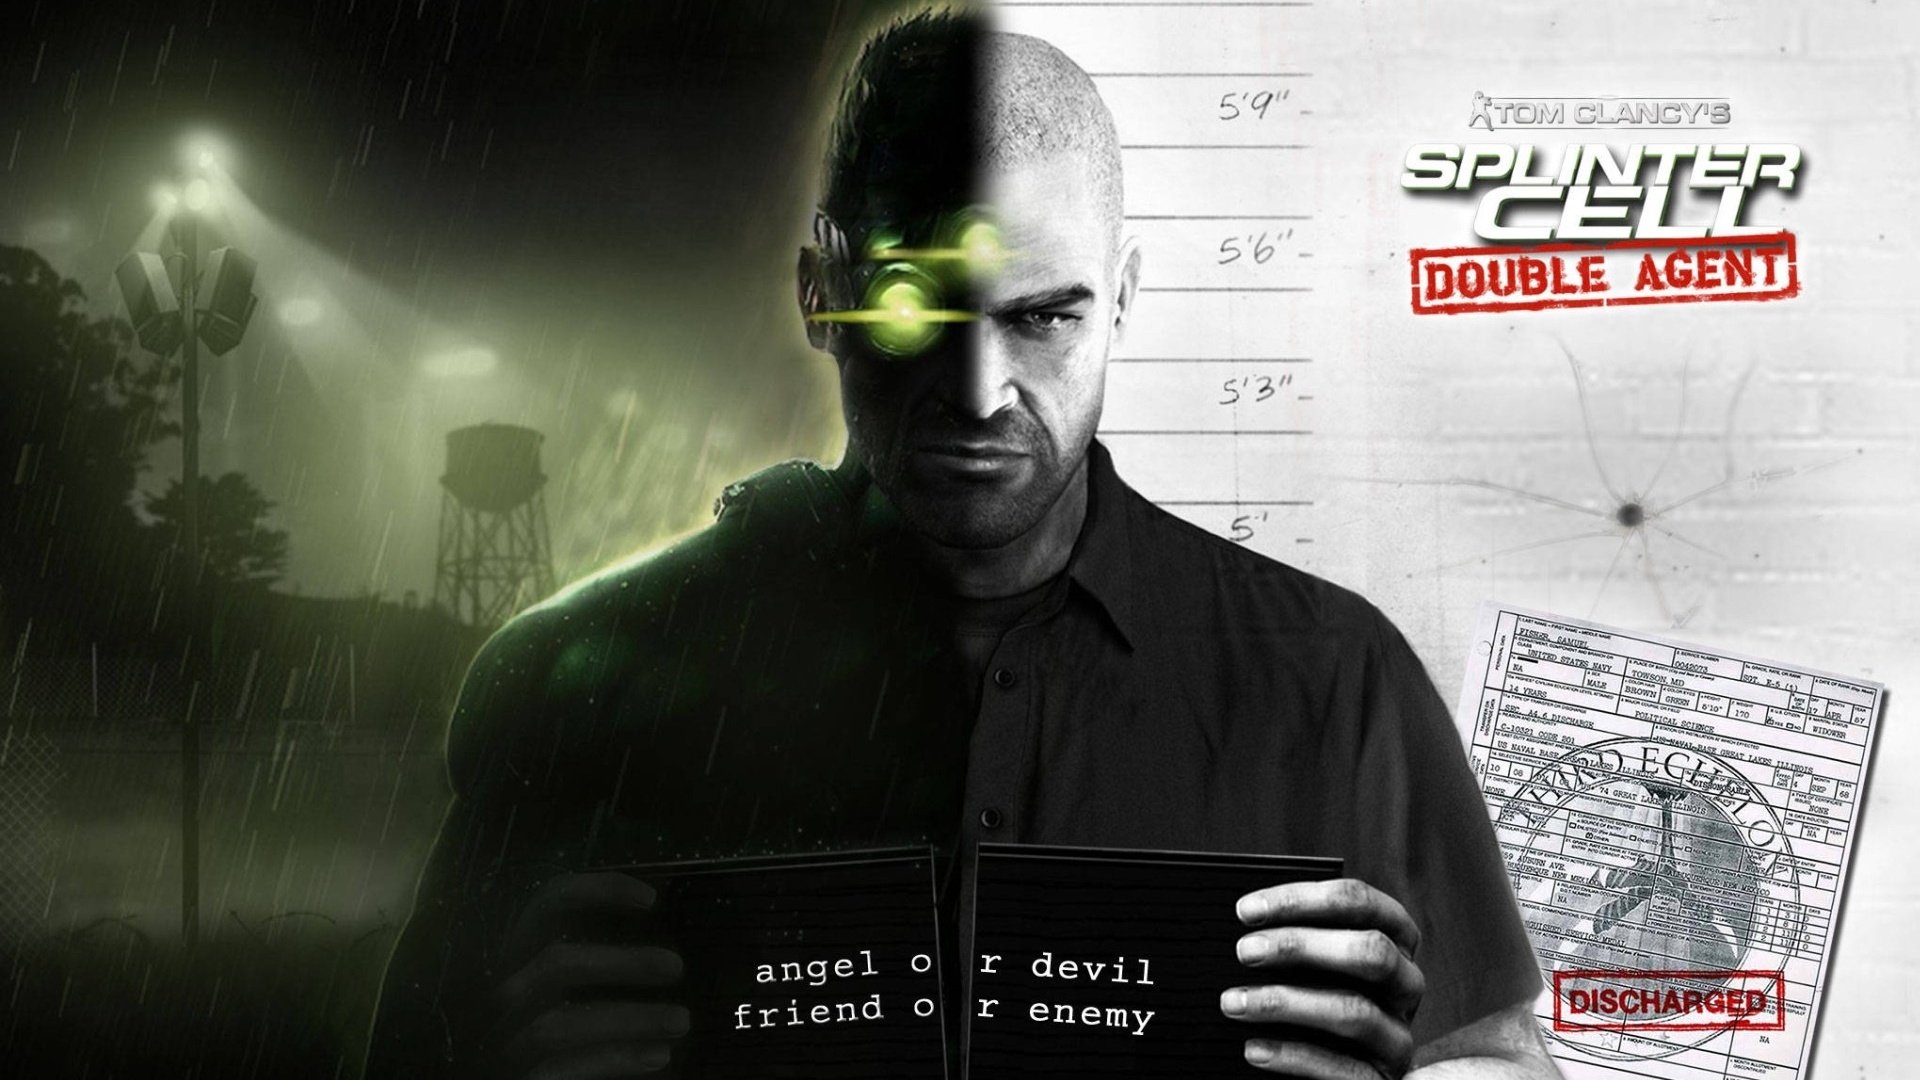 Splinter Cell Double Agent in HD with Full Resolution tutorial - Mod DB